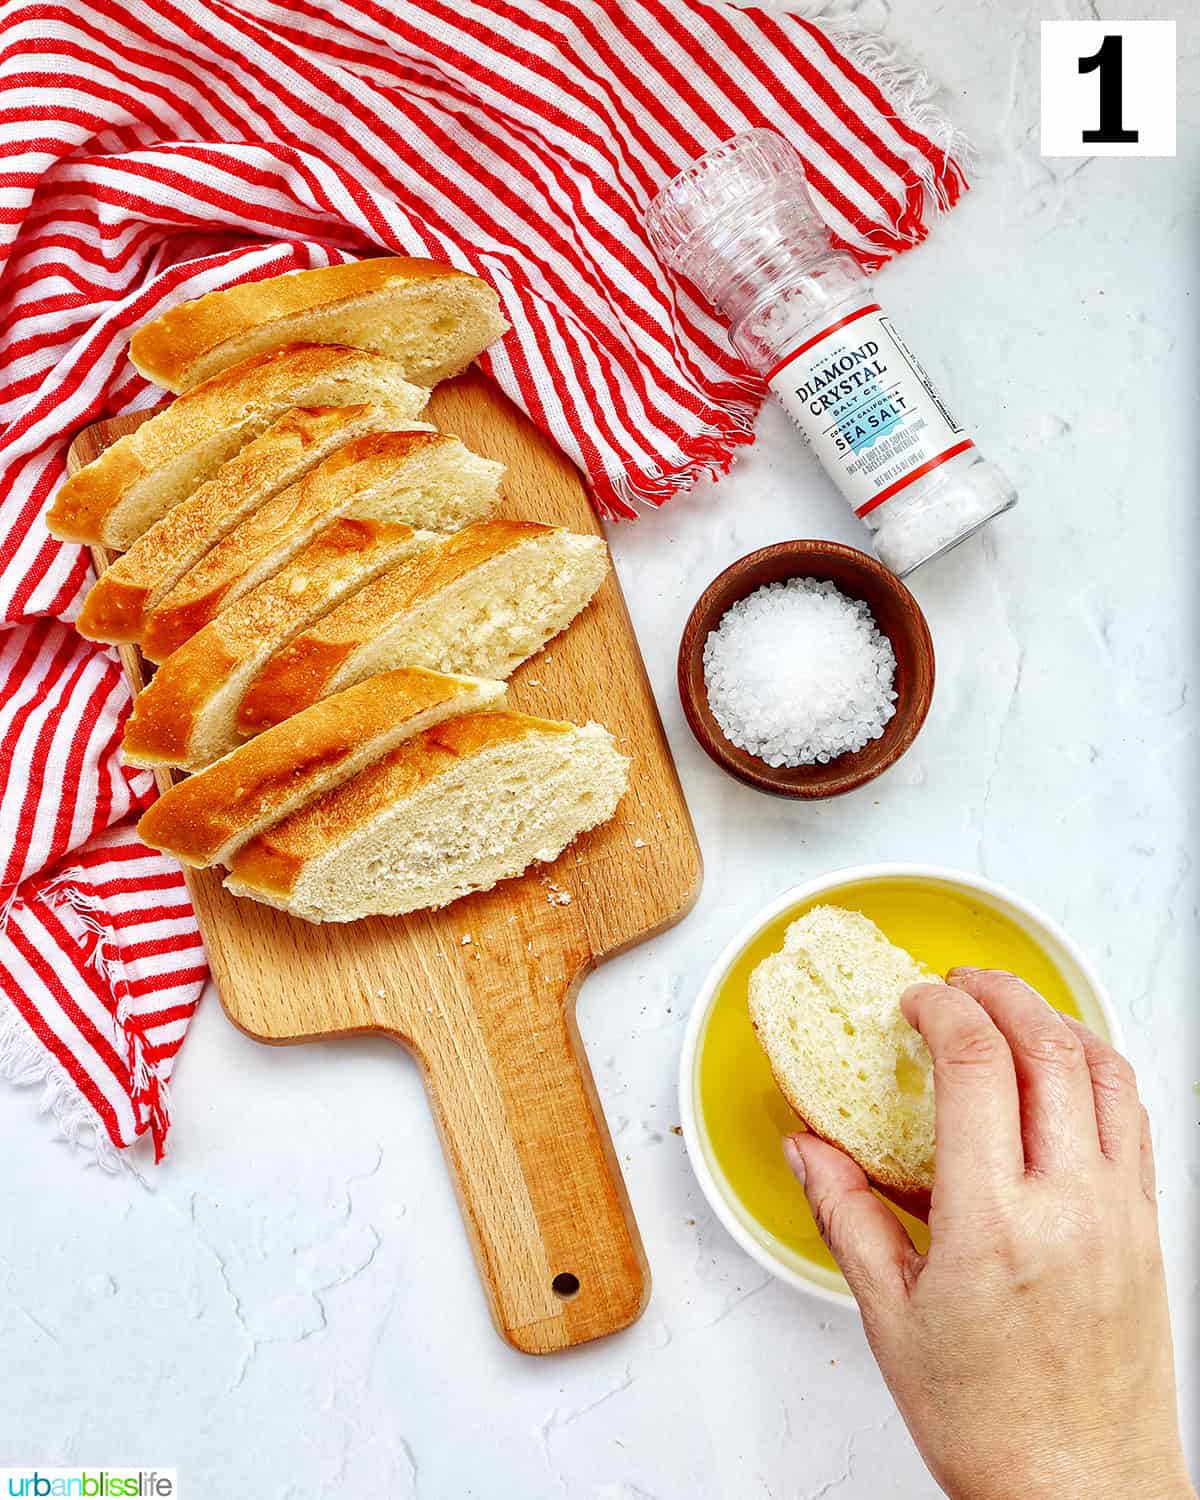 hand dipping a crostini into a bowl of olive oil with crostini slices on a wooden cutting board on red and white towell with bowl and shaker of sea salt.